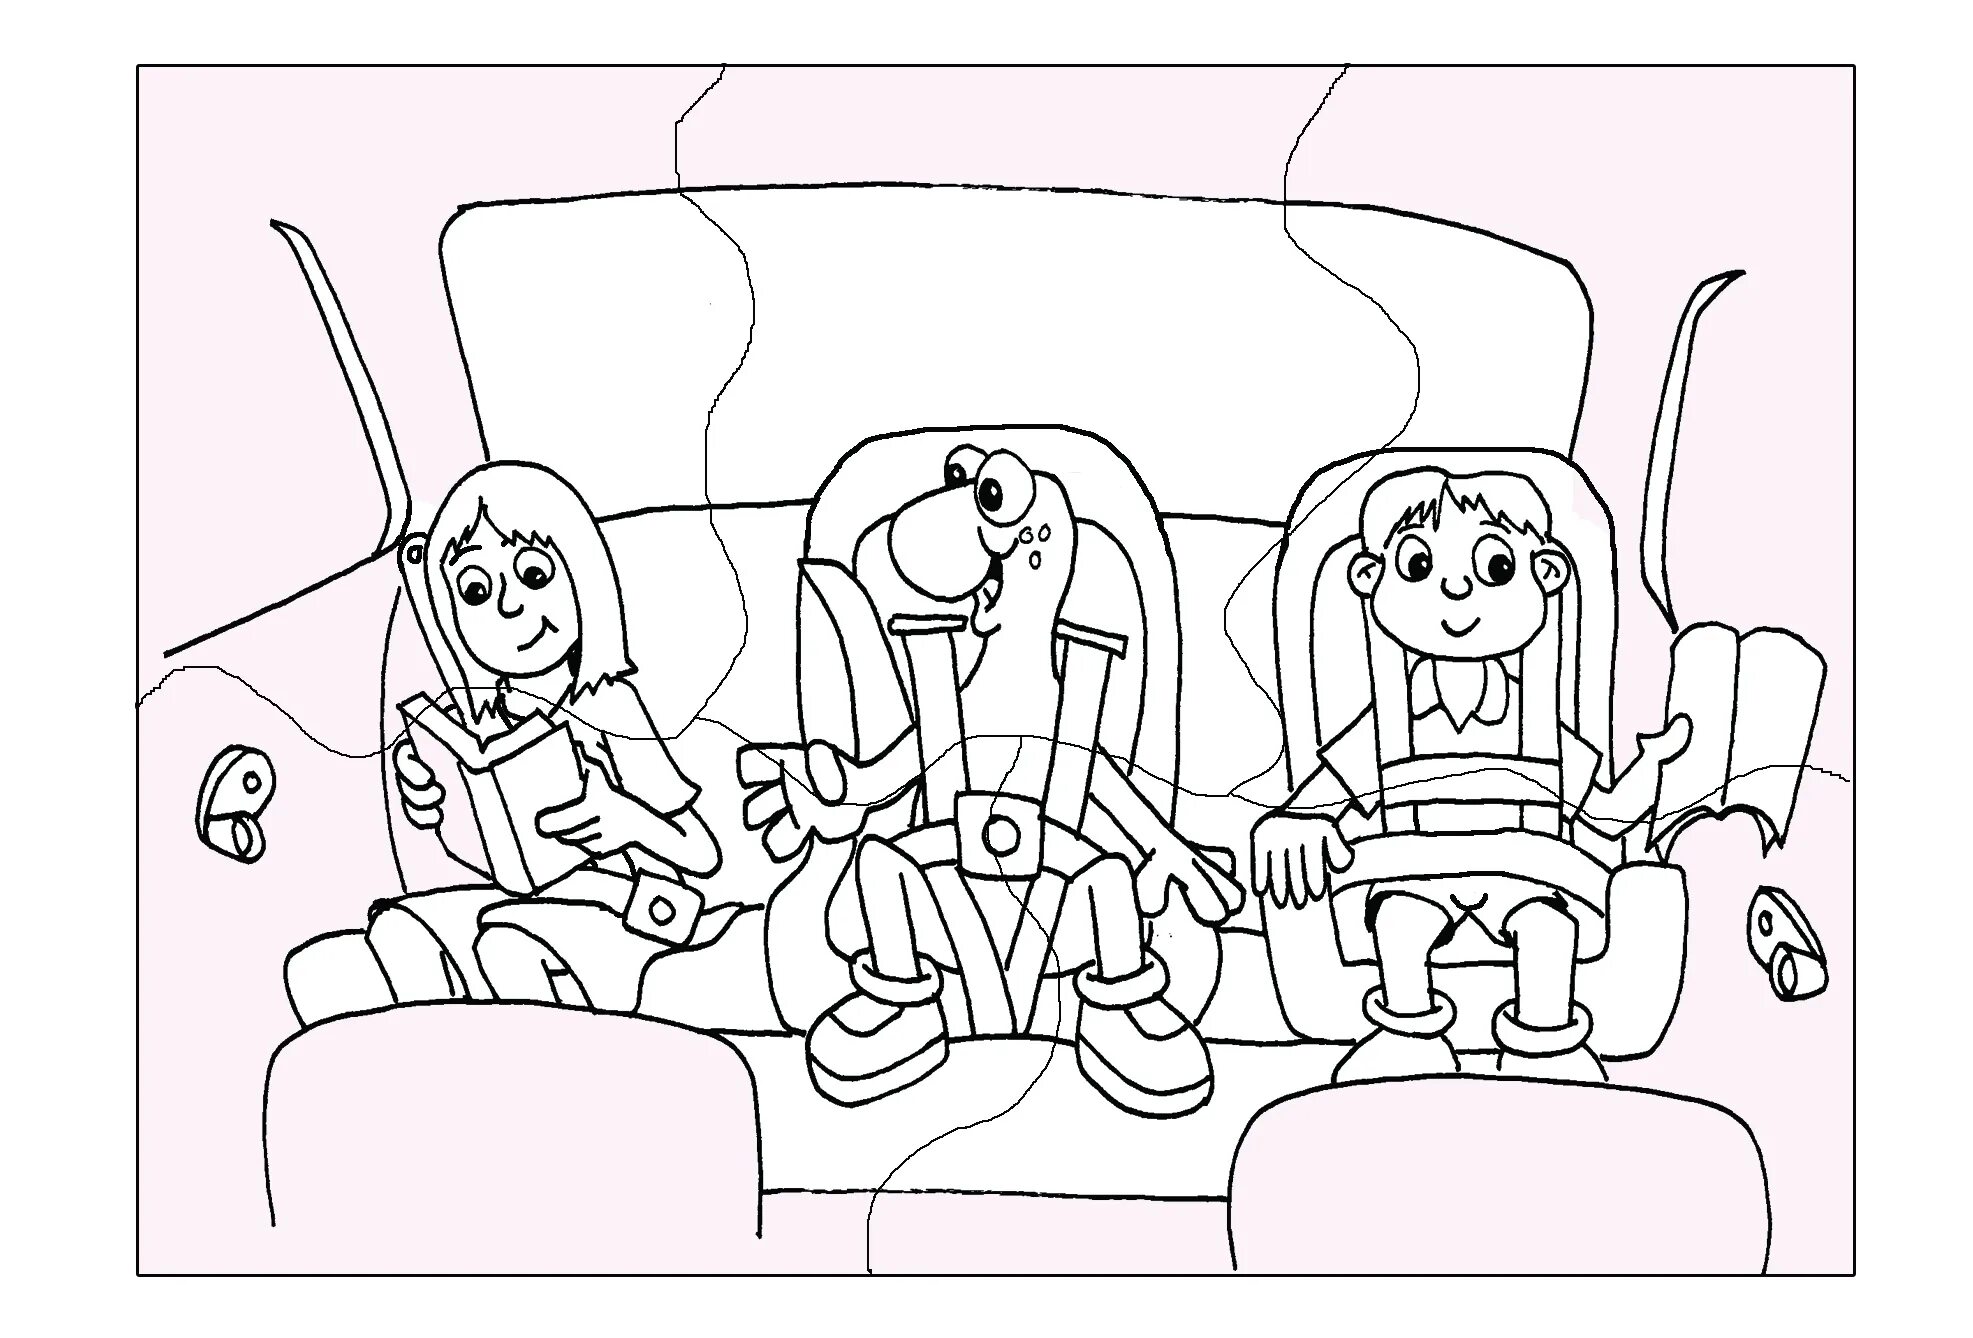 Decorative car seat coloring page